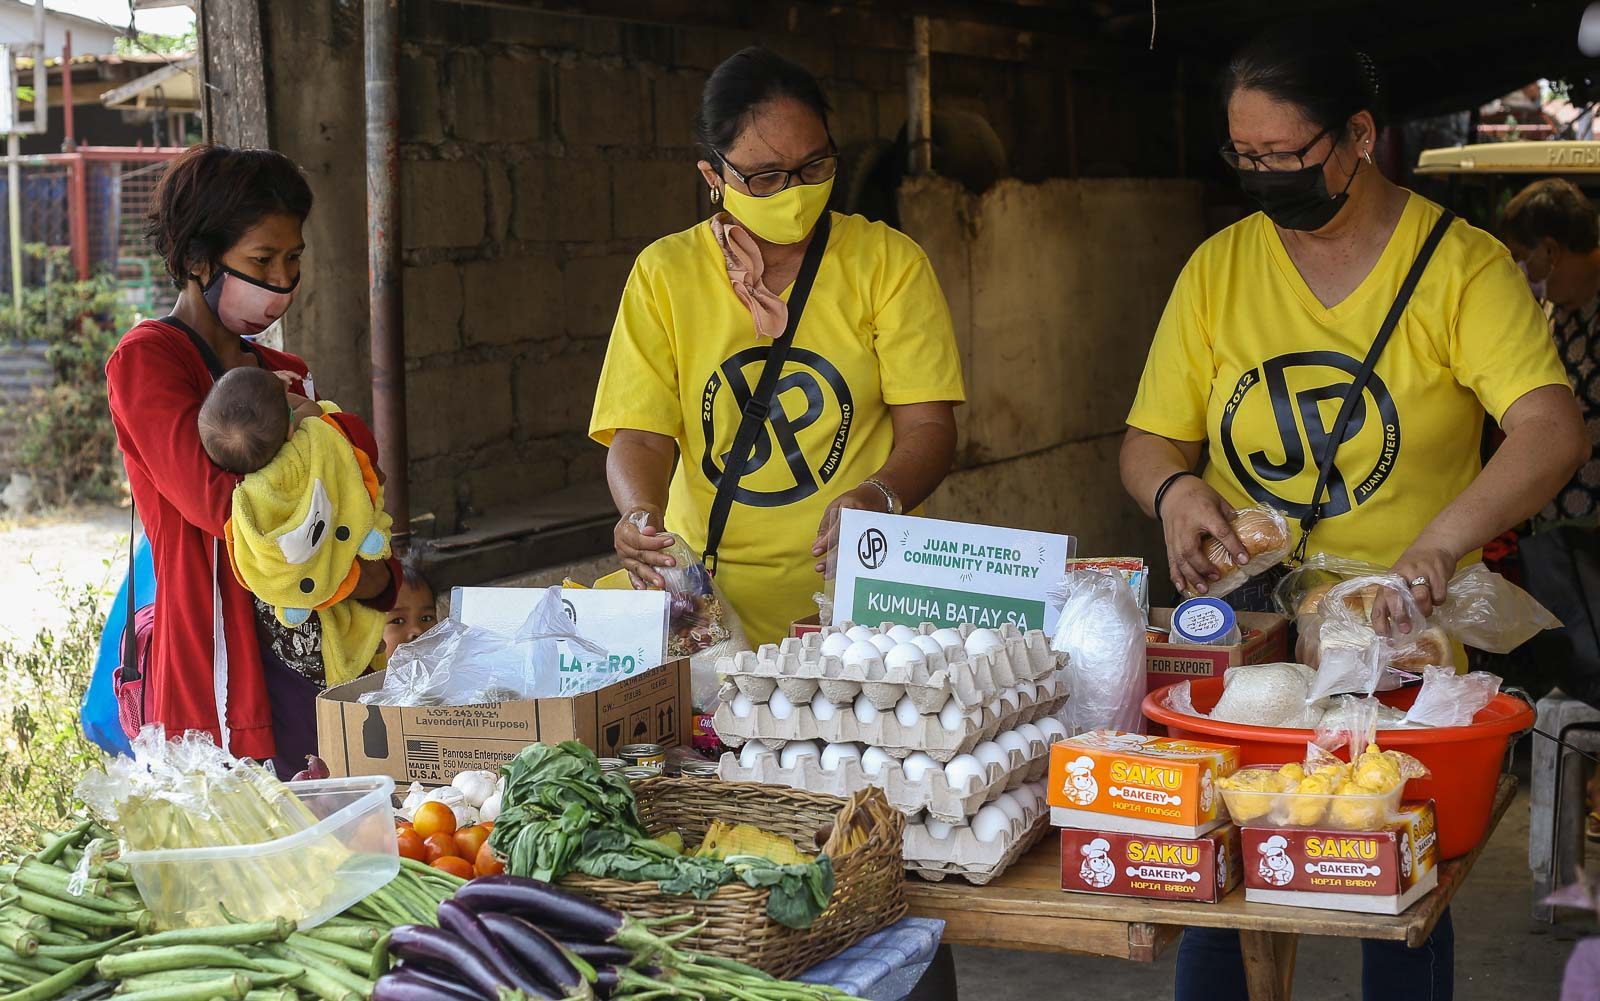 DILG’s contradicting statements on community pantry permit sow confusion